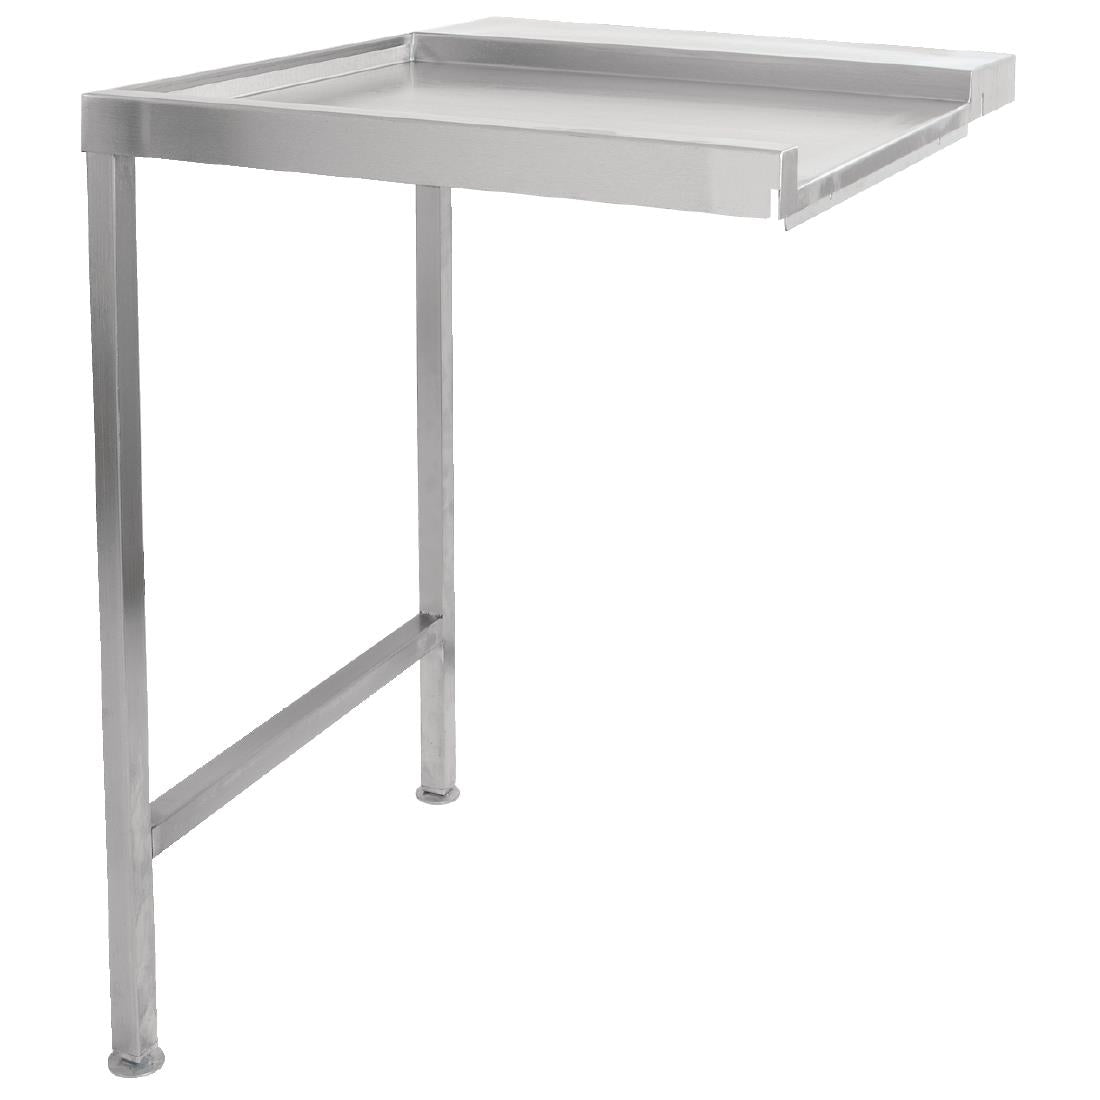 GD921 Classeq Pass Through Dishwasher Table Left Hand 650mm JD Catering Equipment Solutions Ltd